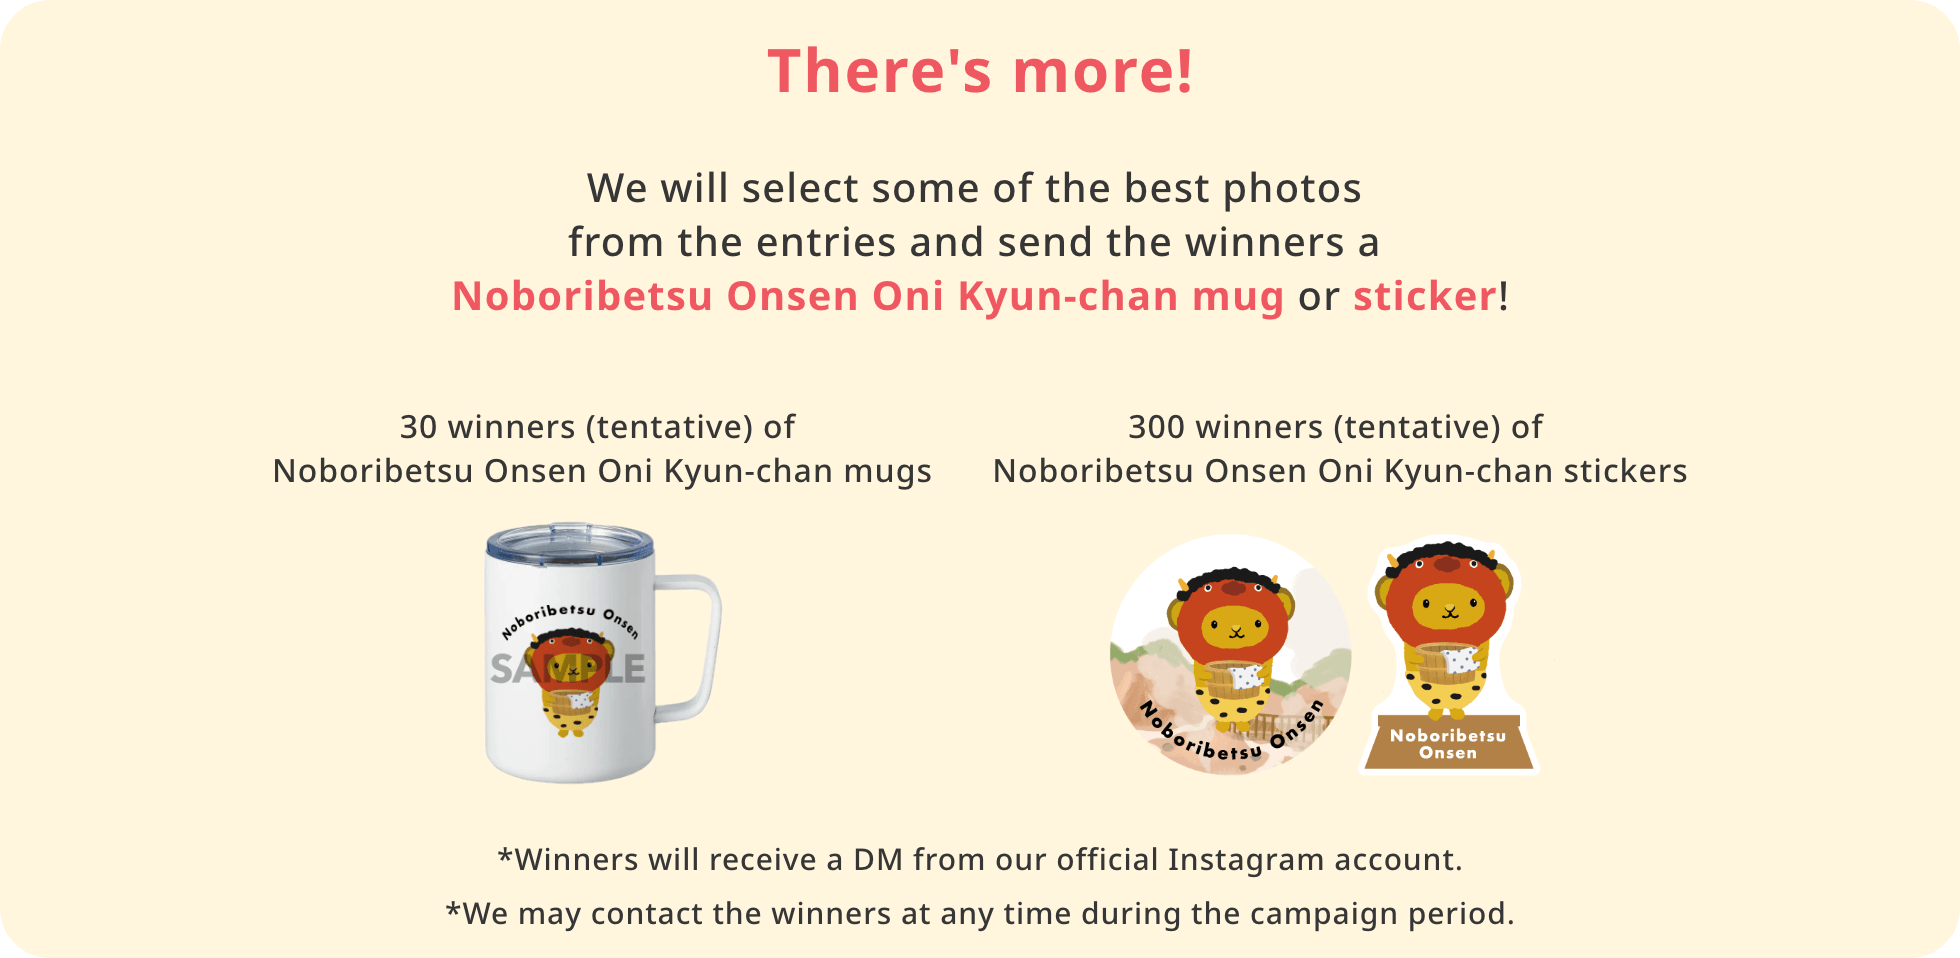 There's more!We will select the best photos from the entries and send a Noboribetsu Onsen Onikyun-chan mug to a few winners each month!